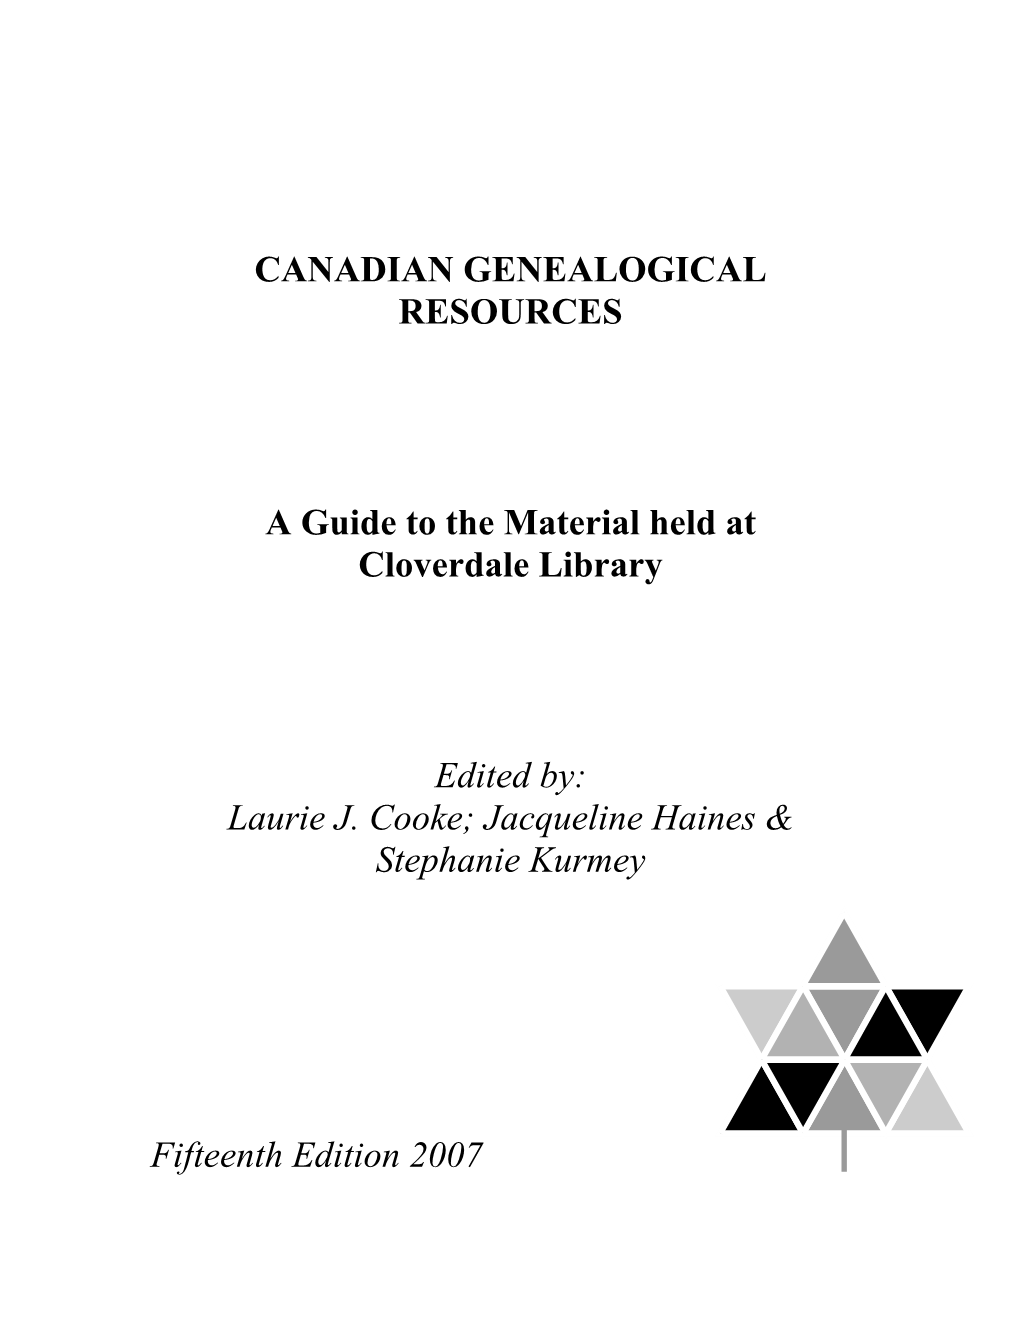 CANADIAN GENEALOGICAL RESOURCES a Guide to The